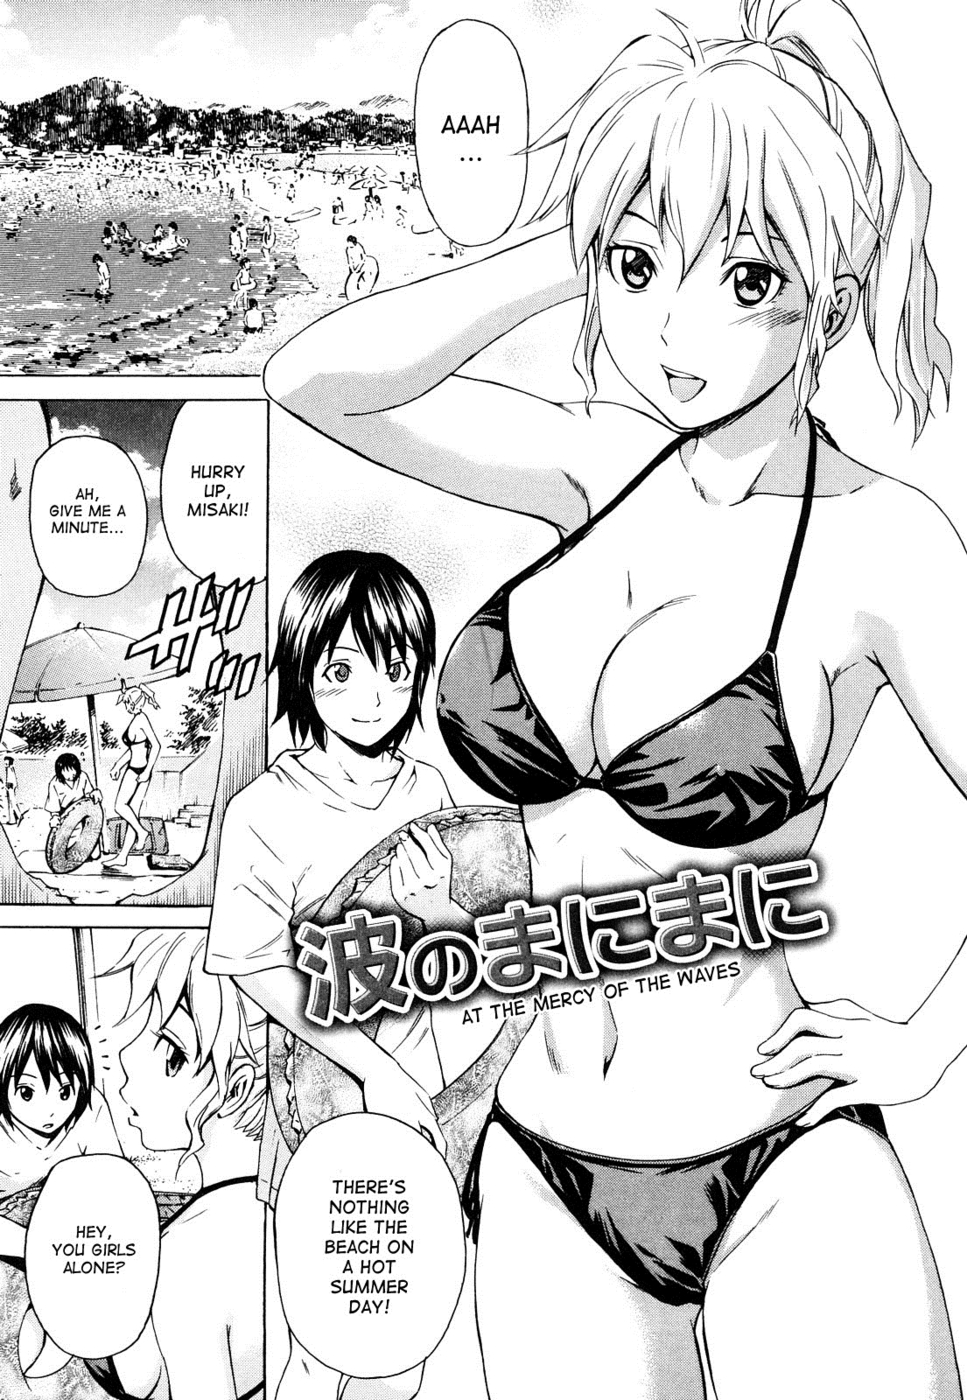 Hentai Manga Comic-At The Mercy of The Waves-Read-1